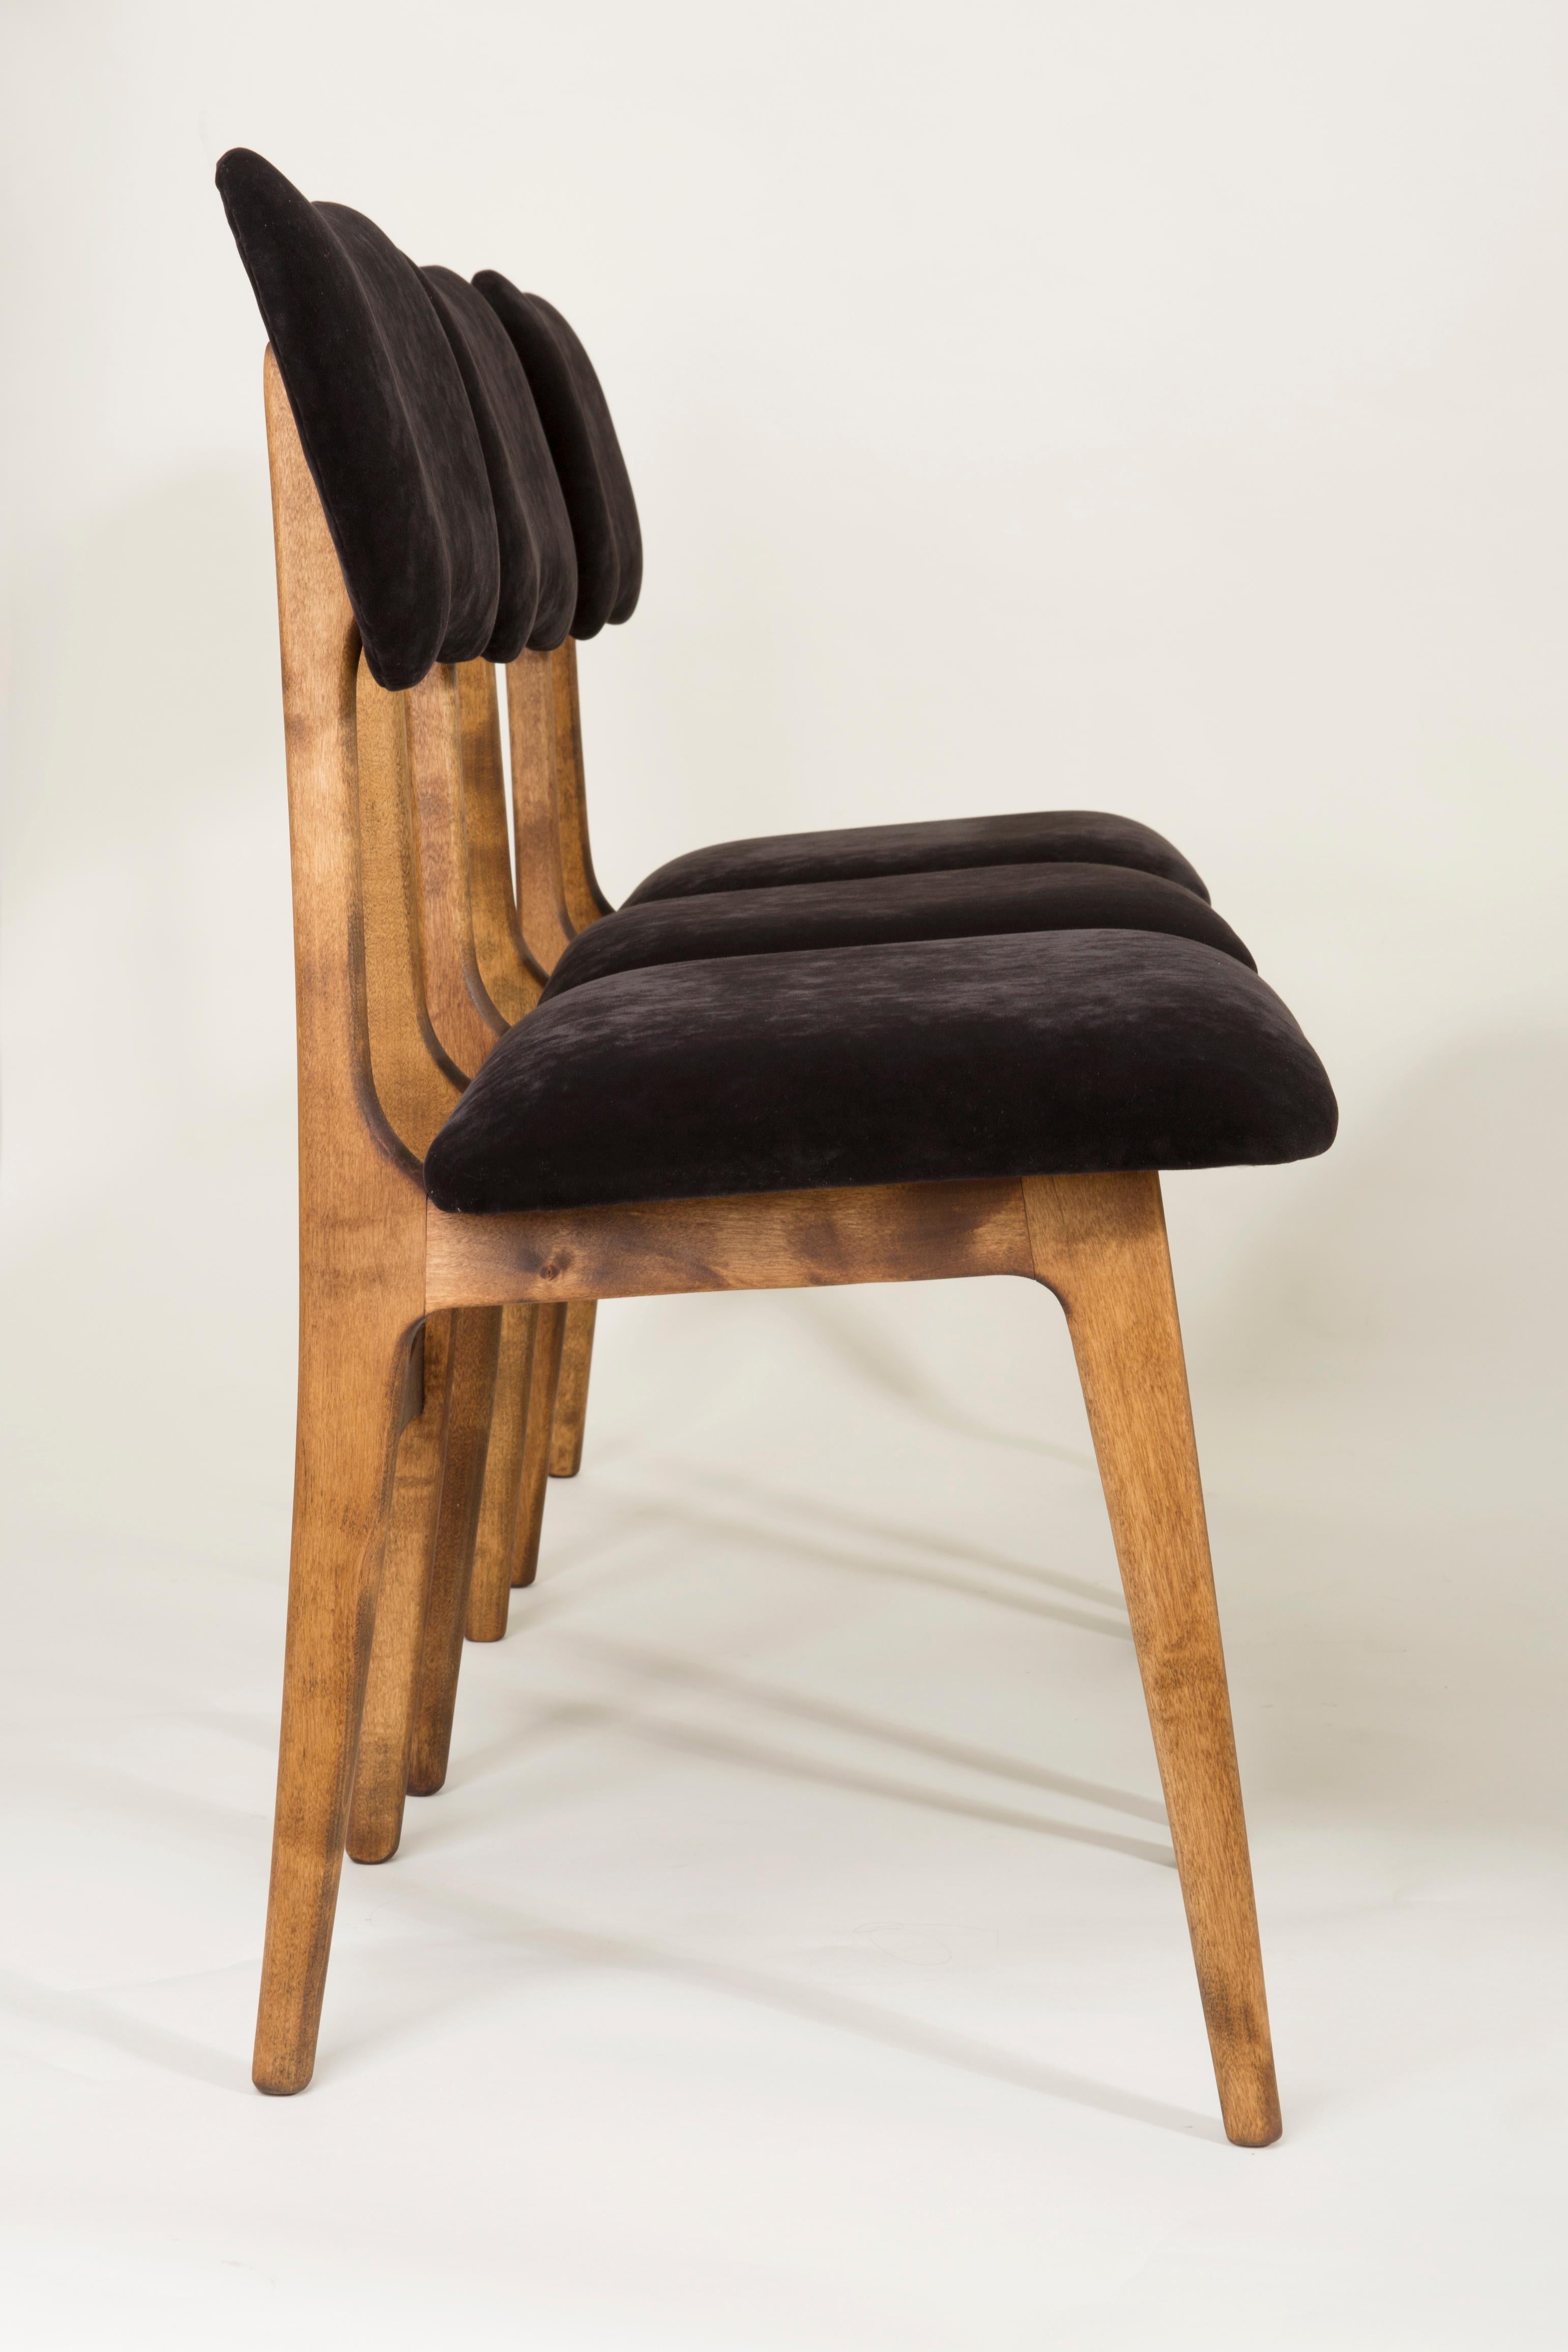 Chairs designed by Prof. Rajmund Halas. Made of beechwood. Chair is after a complete upholstery renovation, the woodwork has been refreshed. Seat and back is dressed in black, durable and pleasant to the touch velvet fabric. Chair is stable and very